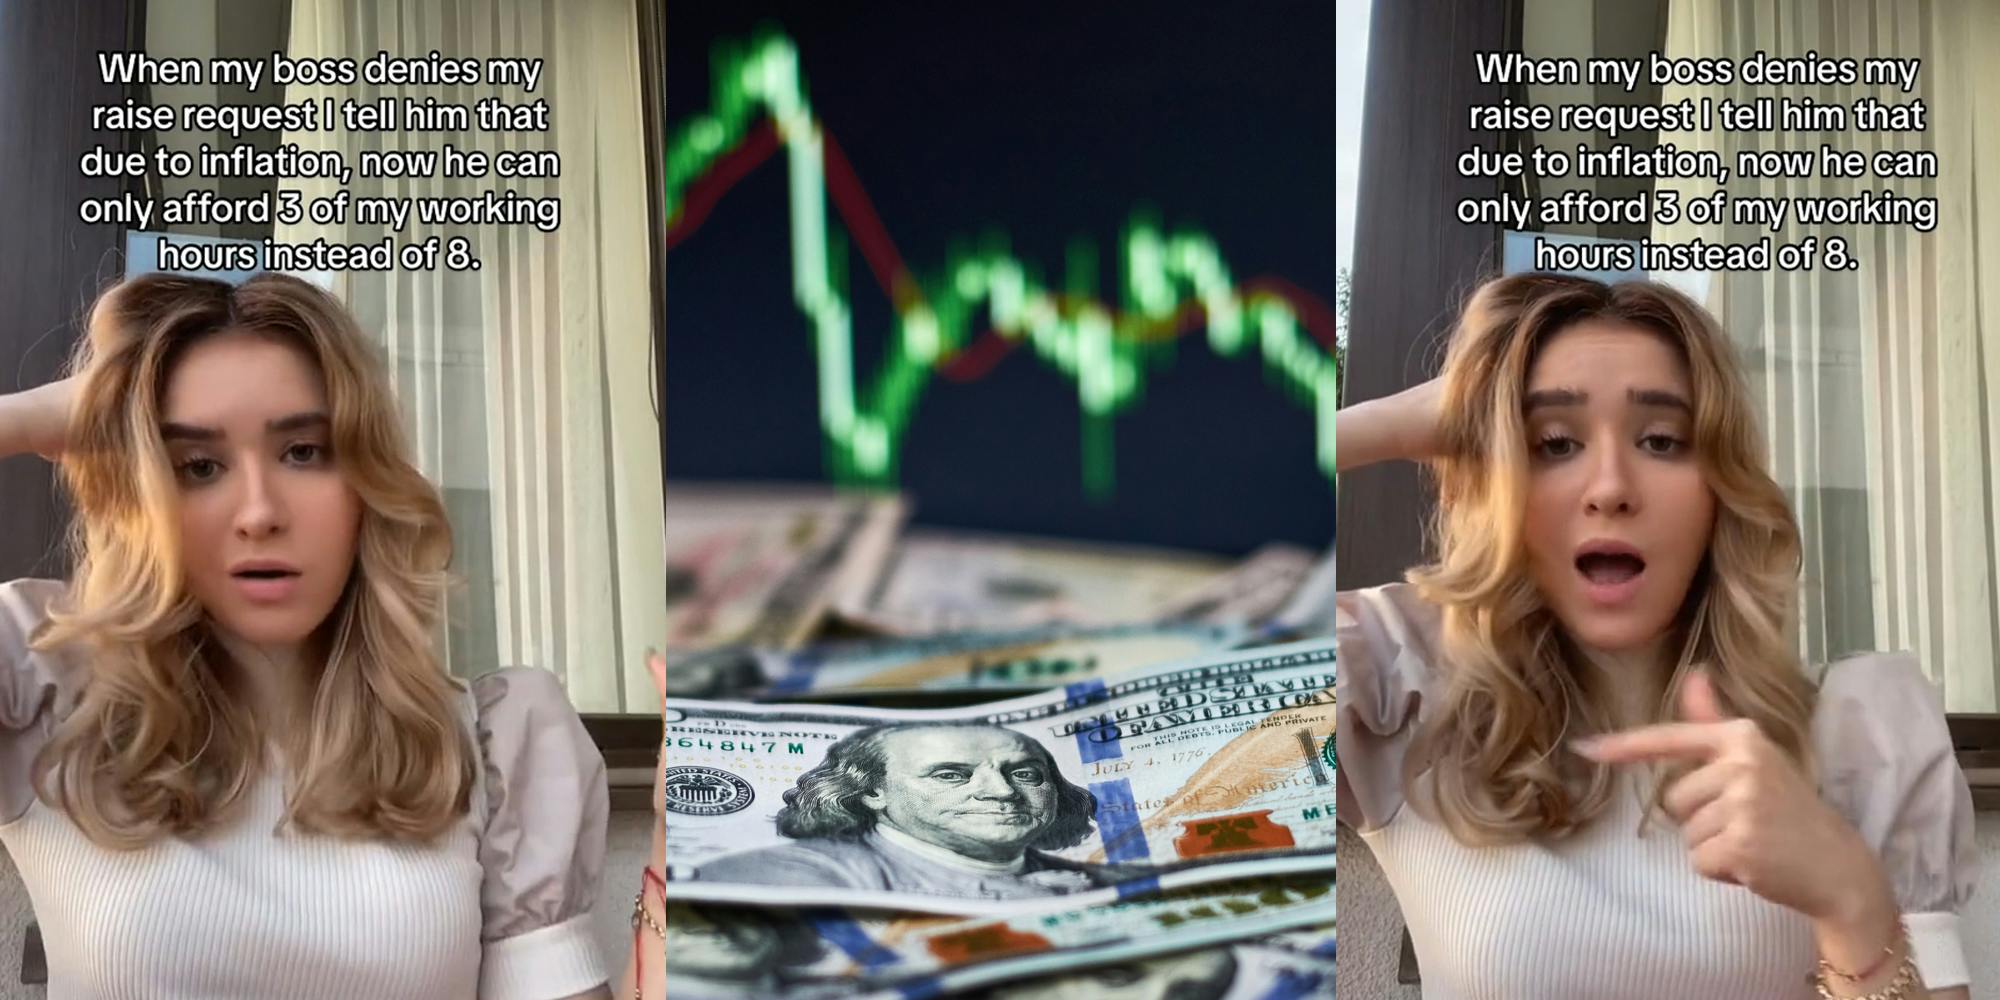 woman speaking with caption "When my boss denies my raise request I tell him that due to inflation, now he can only afford 3 of my working hours instead of 8." (l) 100 dollar bills in front of graph inflation concept (c) woman speaking with caption "When my boss denies my raise request I tell him that due to inflation, now he can only afford 3 of my working hours instead of 8." (r)